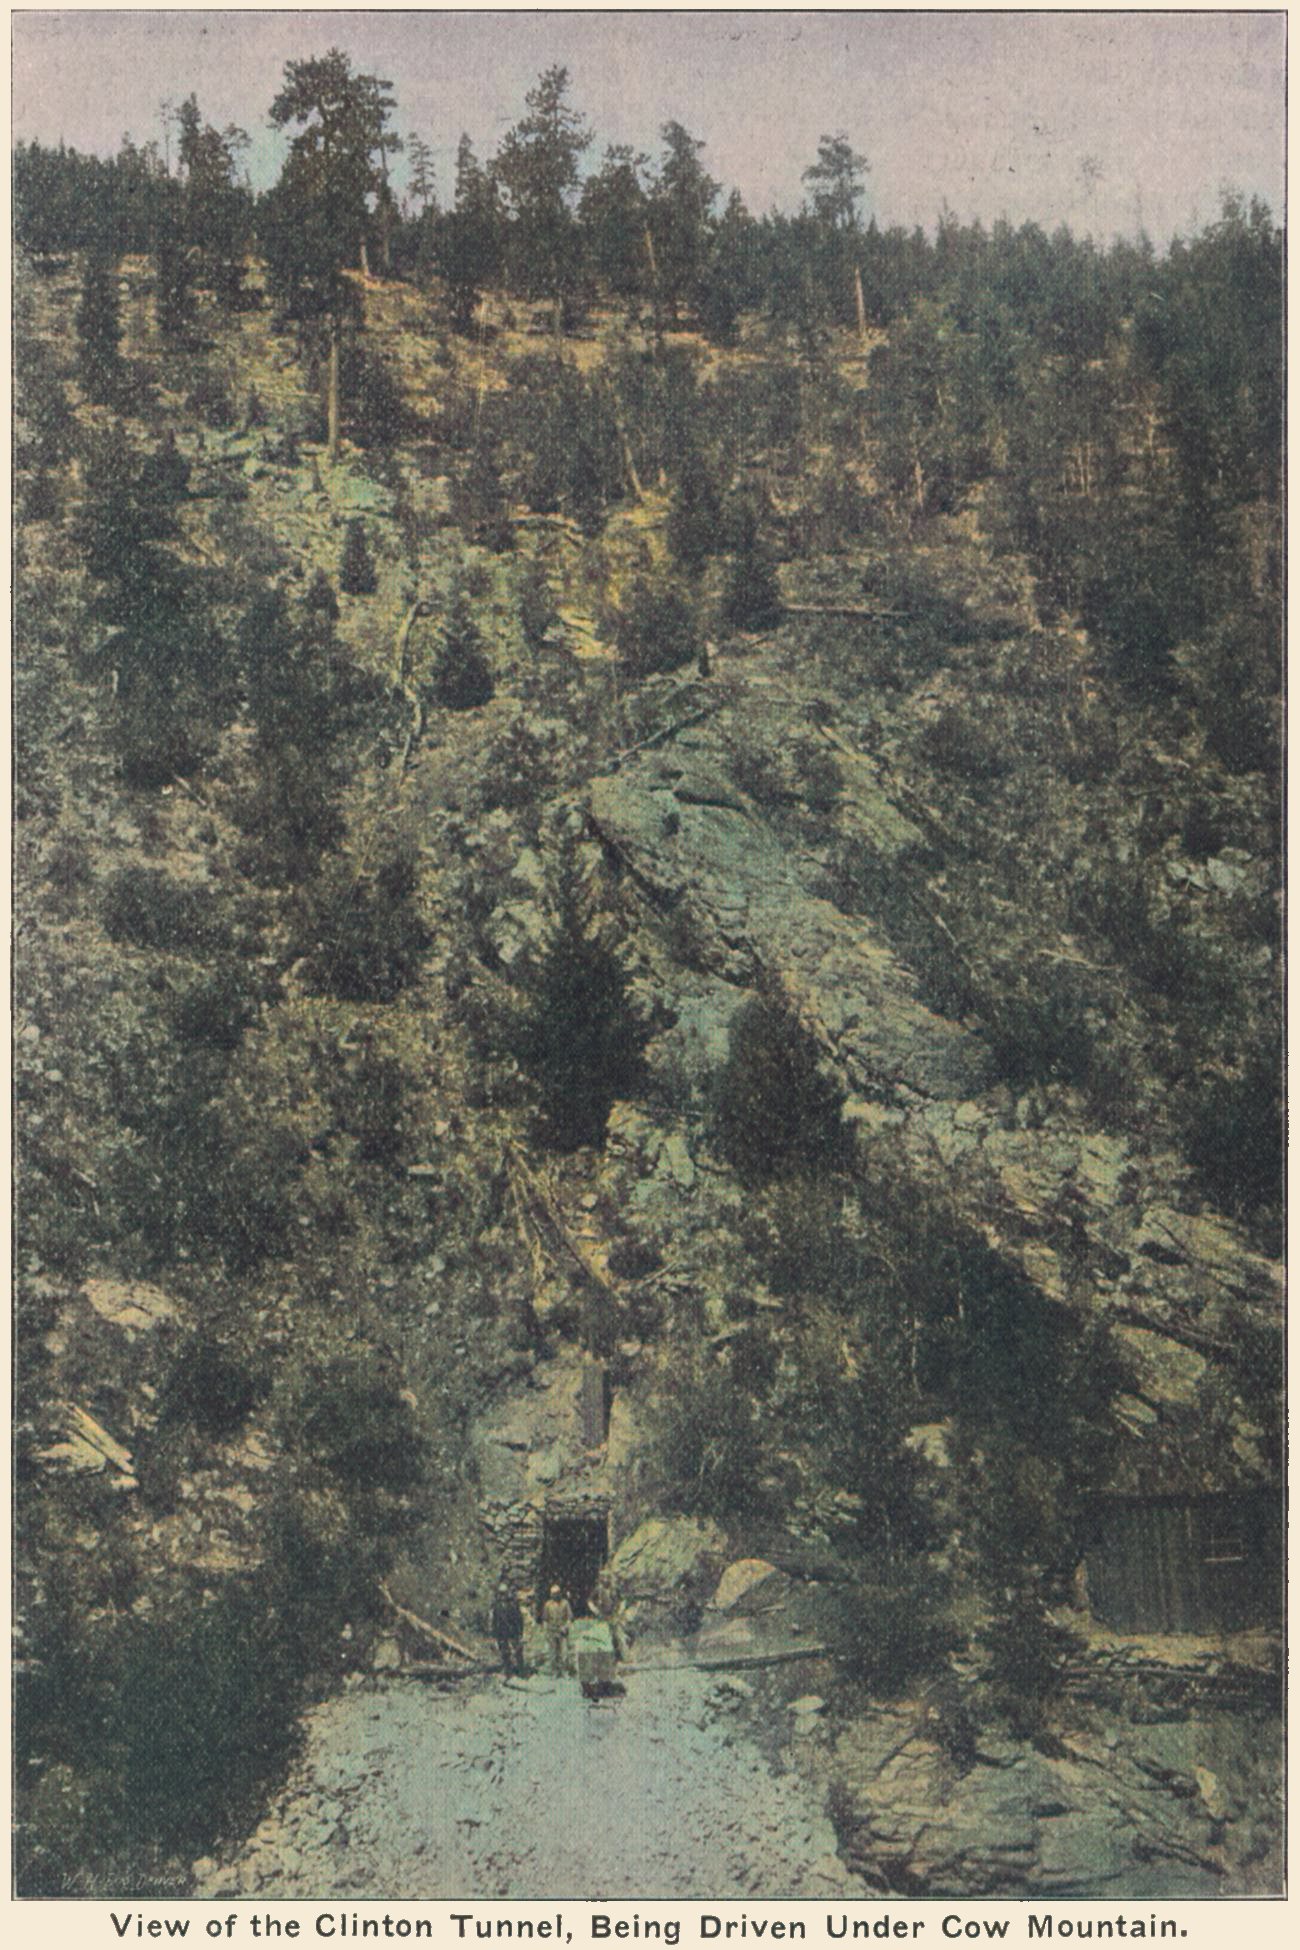 This might very much just be an illustration of a Tunnel type of mine, not at all linked to the Clinton Tunnel or even the Cripple Creek District. There is no sign of the Short Line roadbed, and it is hard to say for sure this is the mine or what. But the same image appears in this Seeing Cripple Creek book, claiming to be of the Clinton Tunnel, so possible it might be it is a true image of the tunnel mouth?
Either way, this is a non-profitable mine, laying very much on the outside of the District, close to where the Short Line crosses over Beaver Creek and the railroad has its own route to/from the district after leaving the parallel run from about Cameron with the M.T. roadbed, where the M.T. goes around a hill and head north towards Gillett, and the Short Line heads east.
-> By end of July 2016 the thinking this is the real Clinton Tunnel was very much killed off by a much better view of was called the site of the Clinton tunnel, feeling more real, when comparing to Google Earth view, but even that is not 100% correct as it is still ''doctored'' a little at the mouth of the tunnel itself...
   Scenery on this particular view do not match the scenery at the site I think this is located at, here it is to steep and to much trees, feels more like they needed a tunnel mine view and just took what was available at the time the publication went to print.
   I did procure the colored version of this image. Source was gray-toned, or in common speech black & white. Used an online service and tweaked and worked with image to get what looks best to my eyes for the moment.